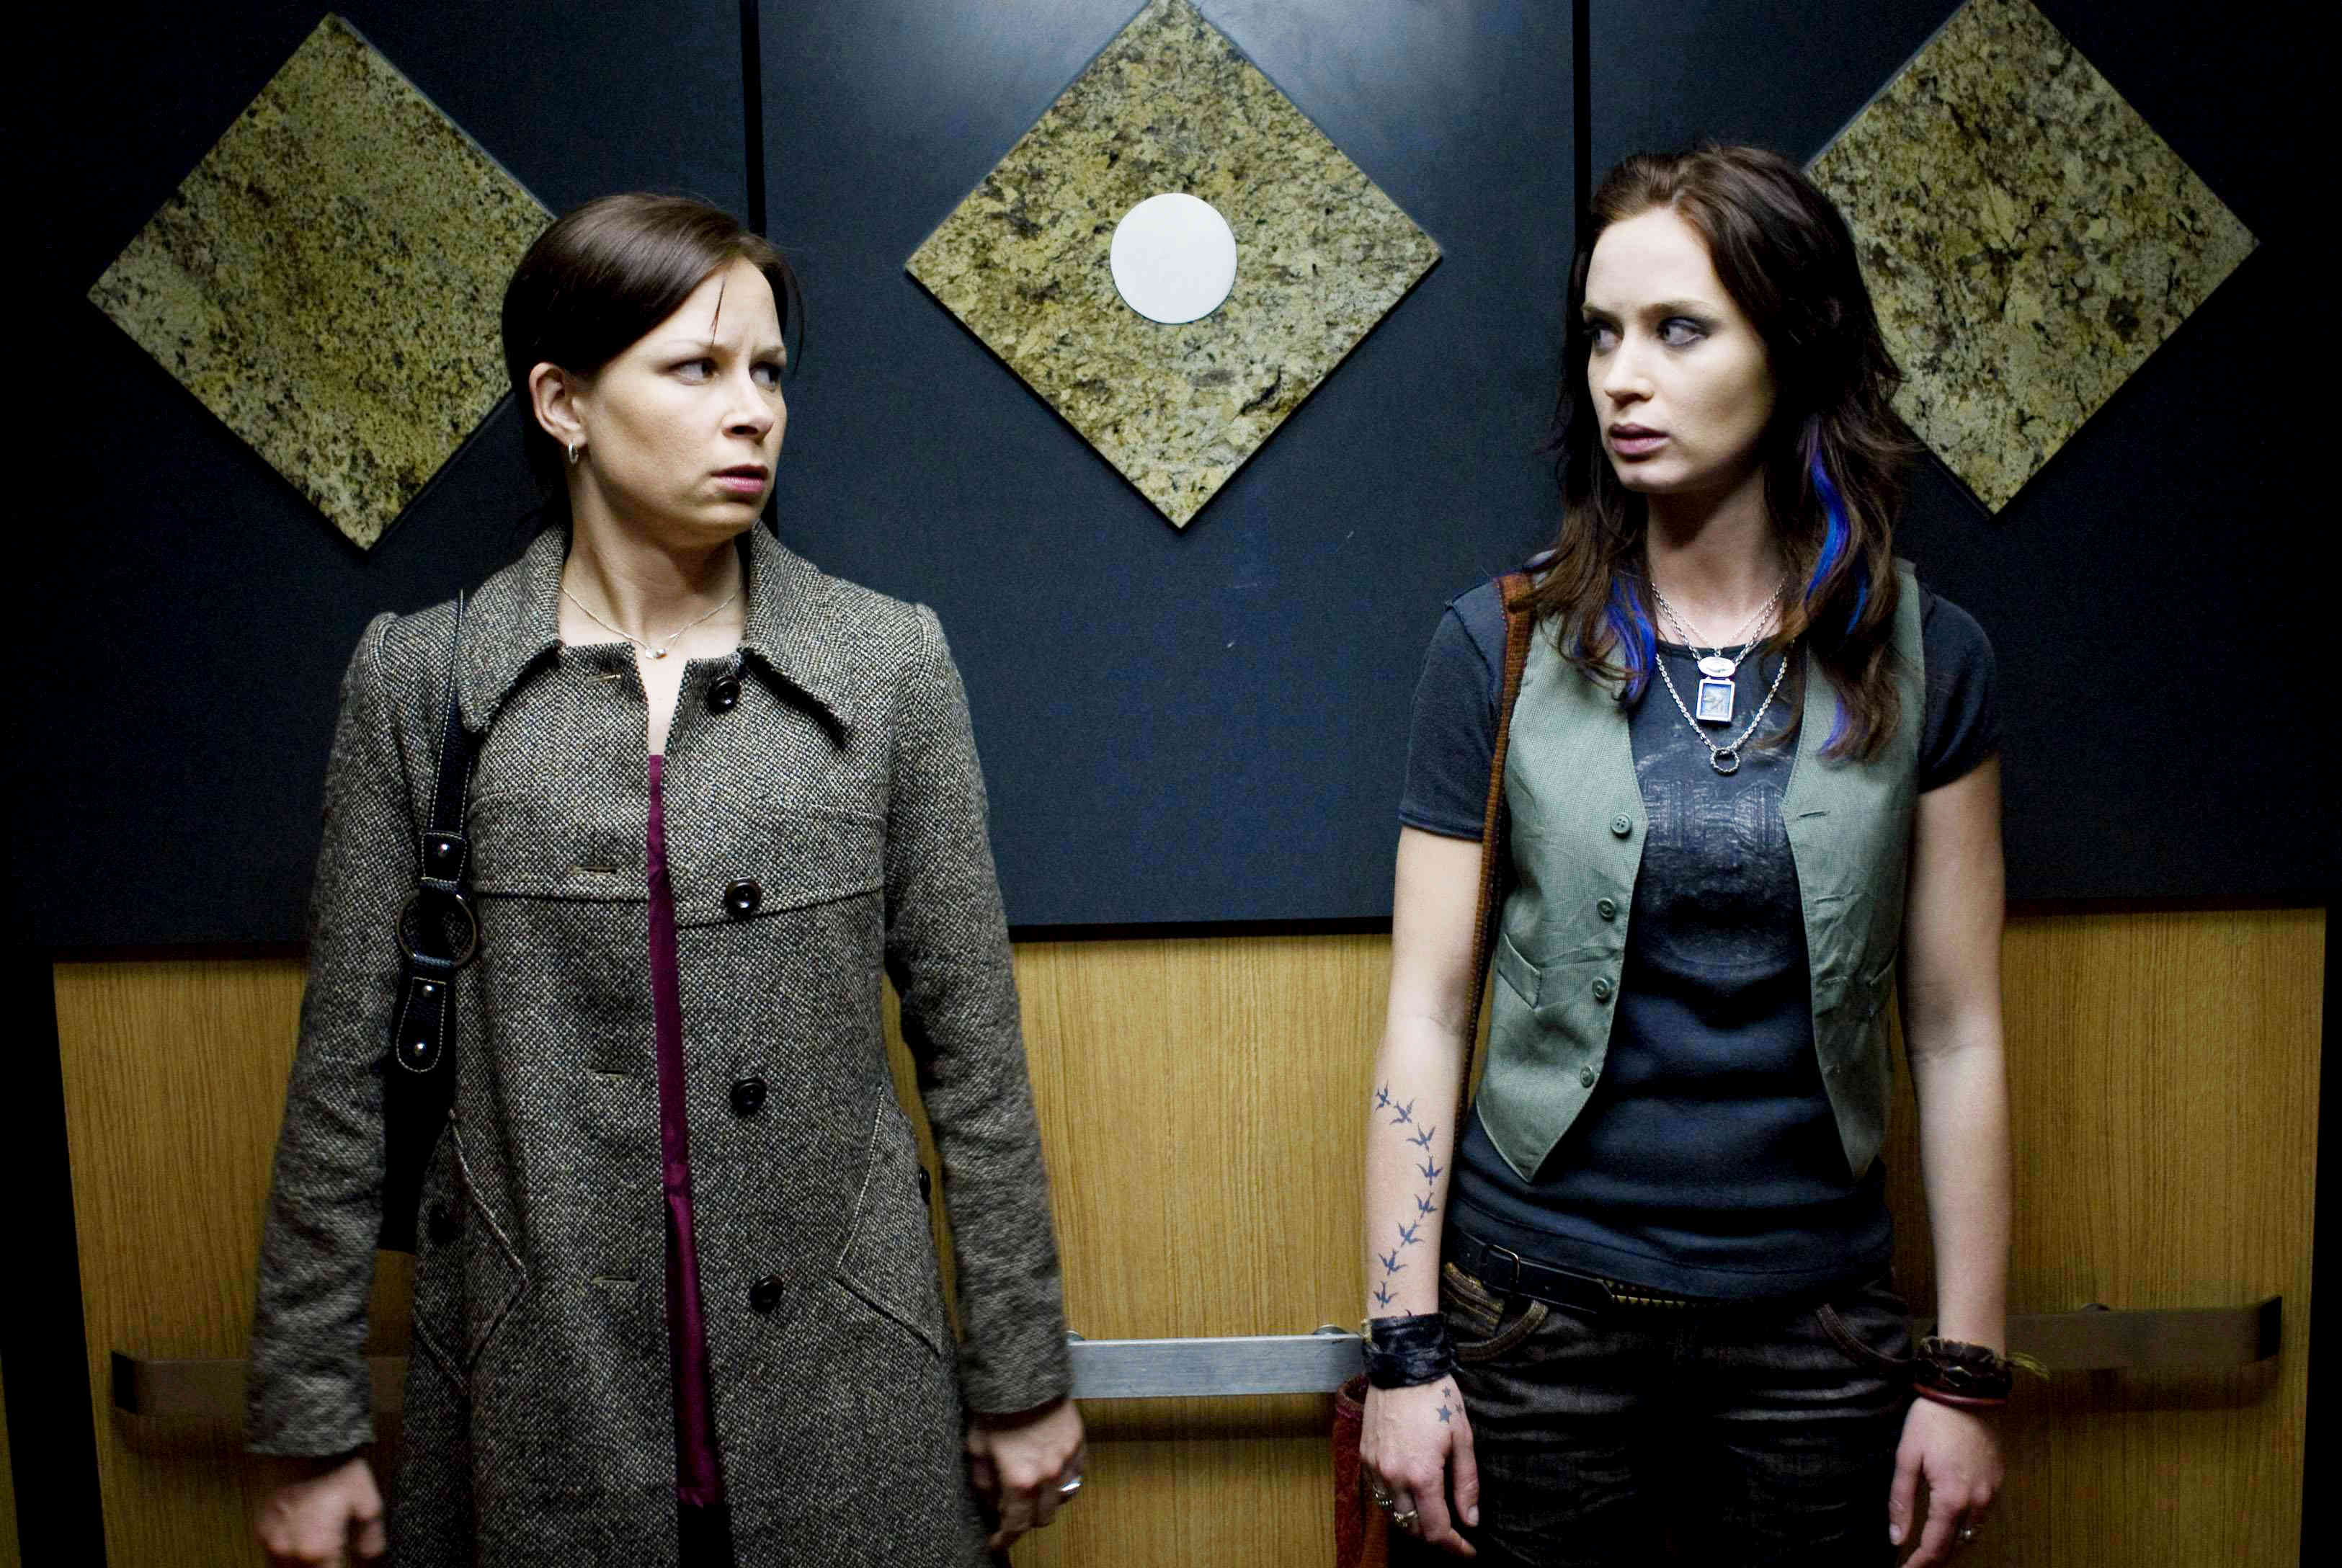 Mary Lynn Rajskub stars as Lynn and Emily Blunt stars as Norah Lorkowski in Overture Films' Sunshine Cleaning (2009). Photo credit by Lacey Terrell.